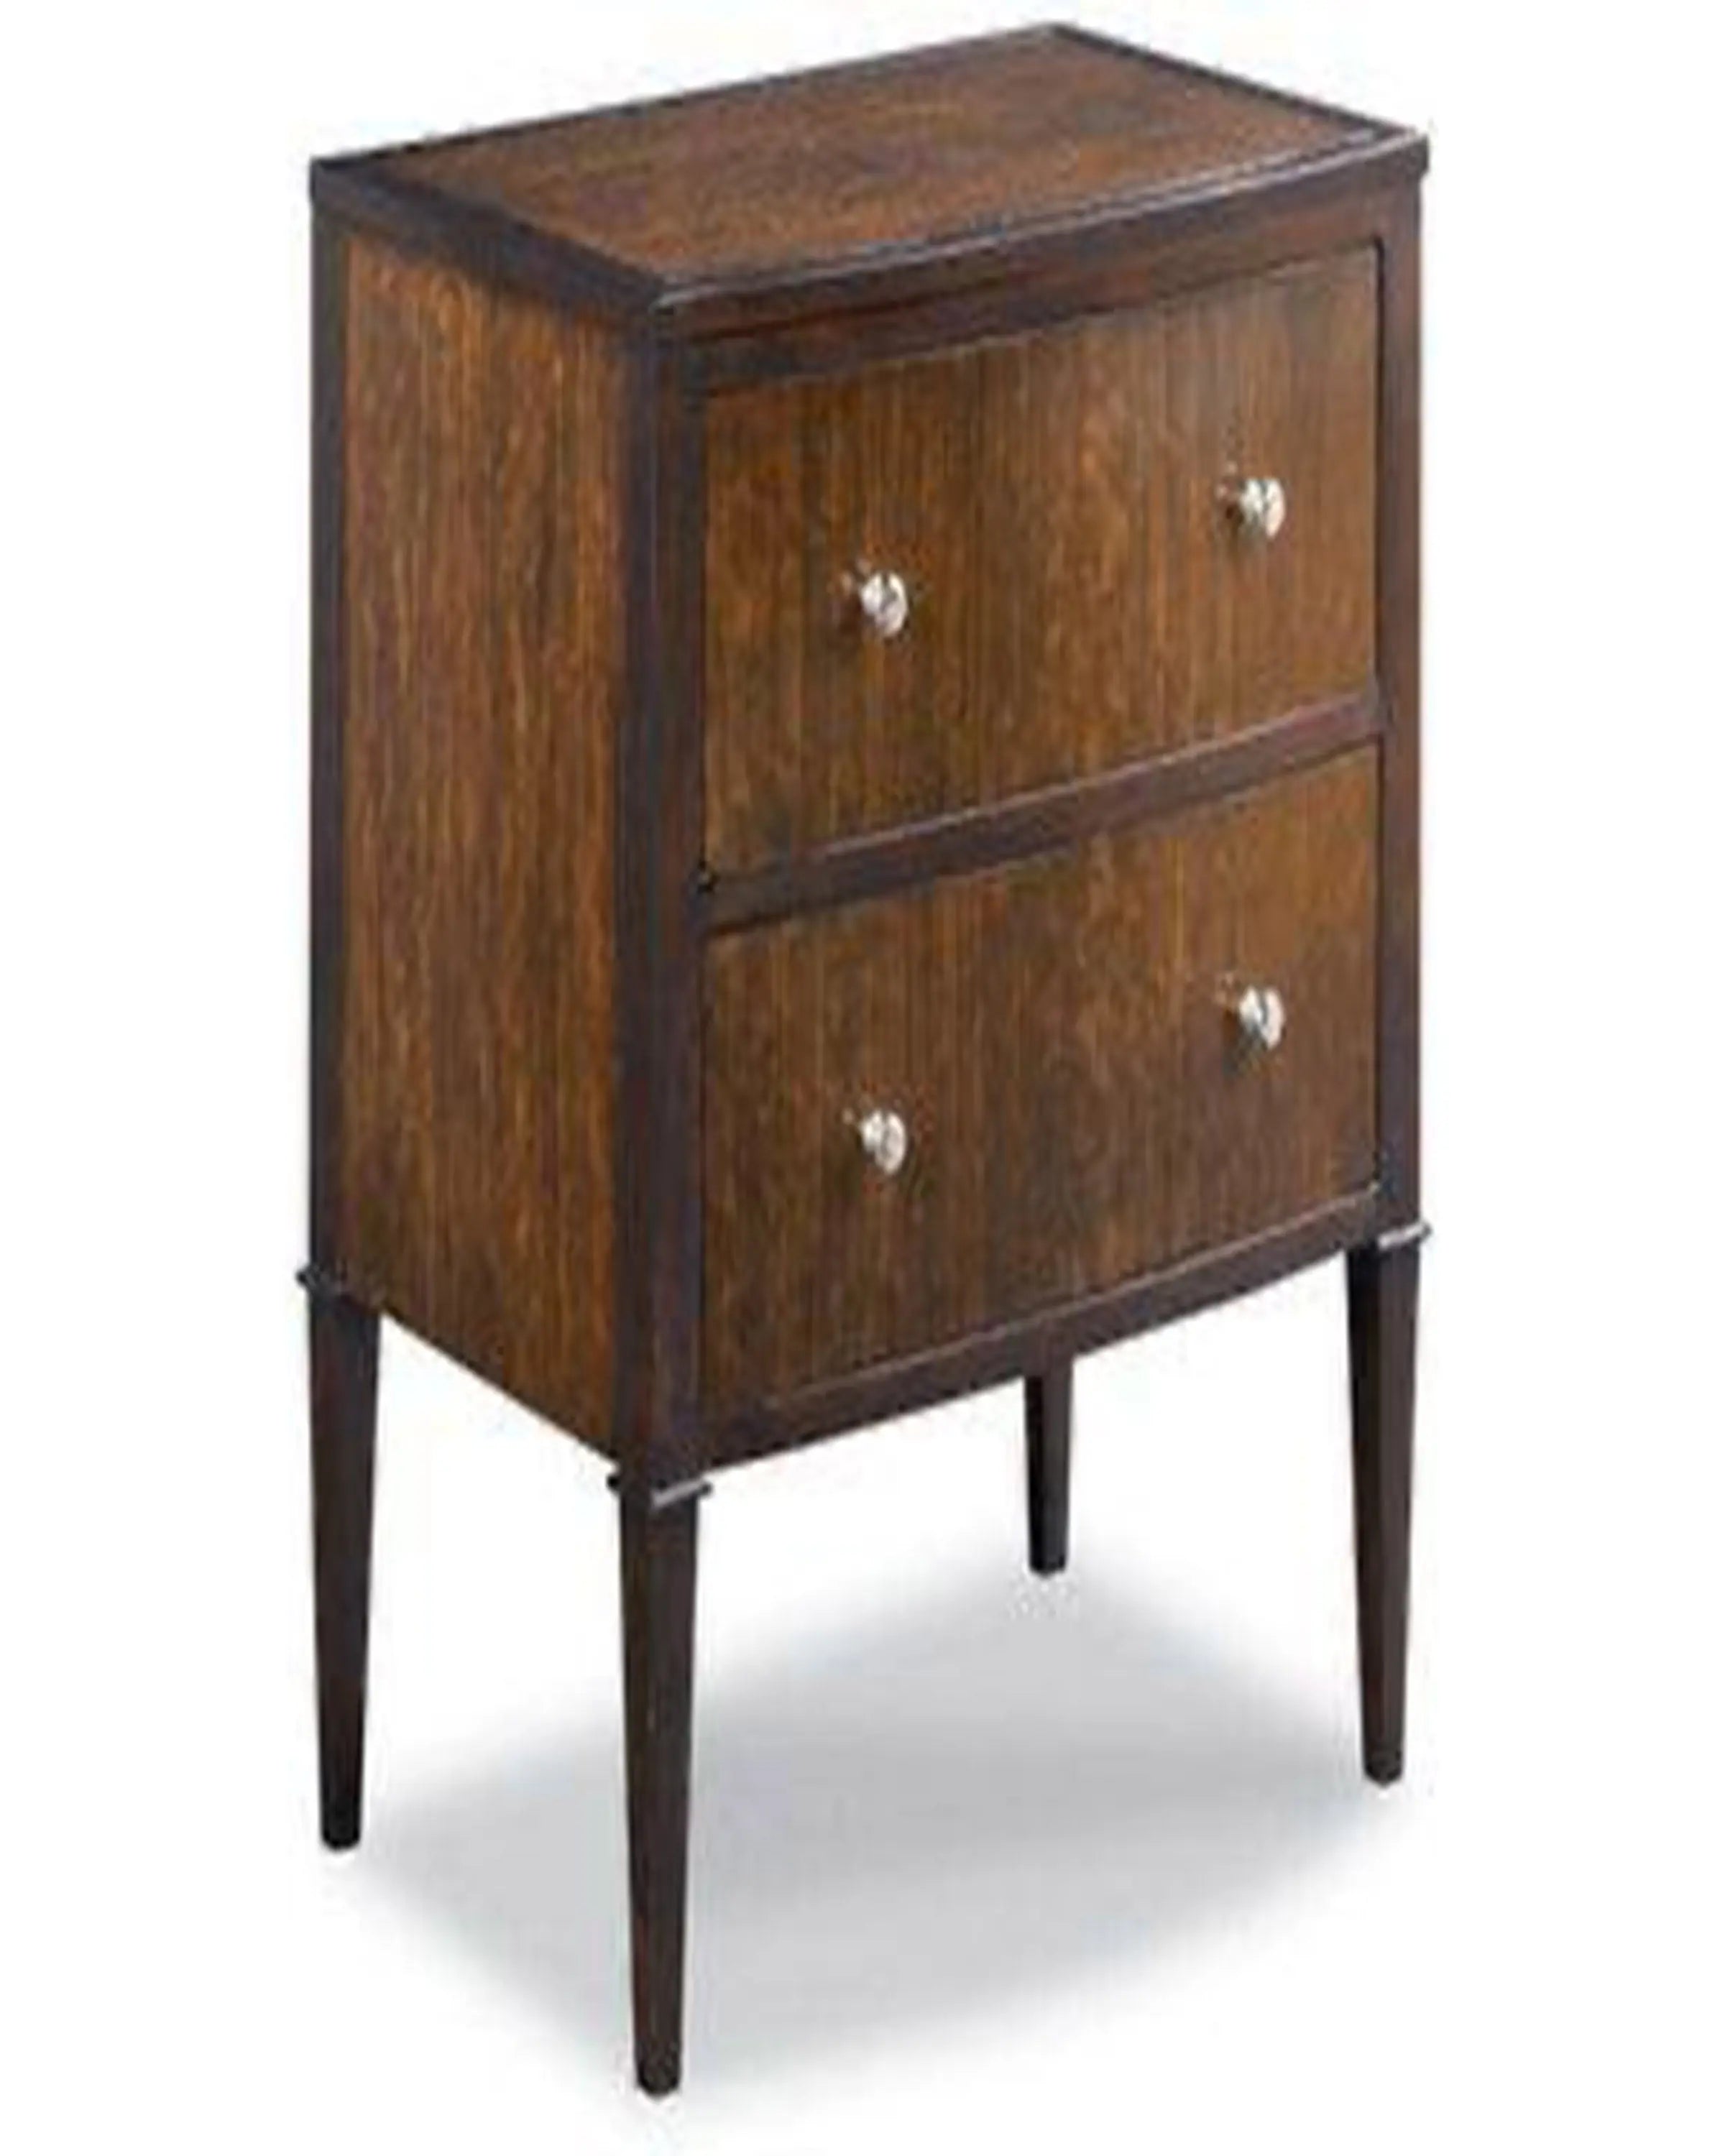 DESNNIS BROWN SIDE TABLE ANGIE HOMES